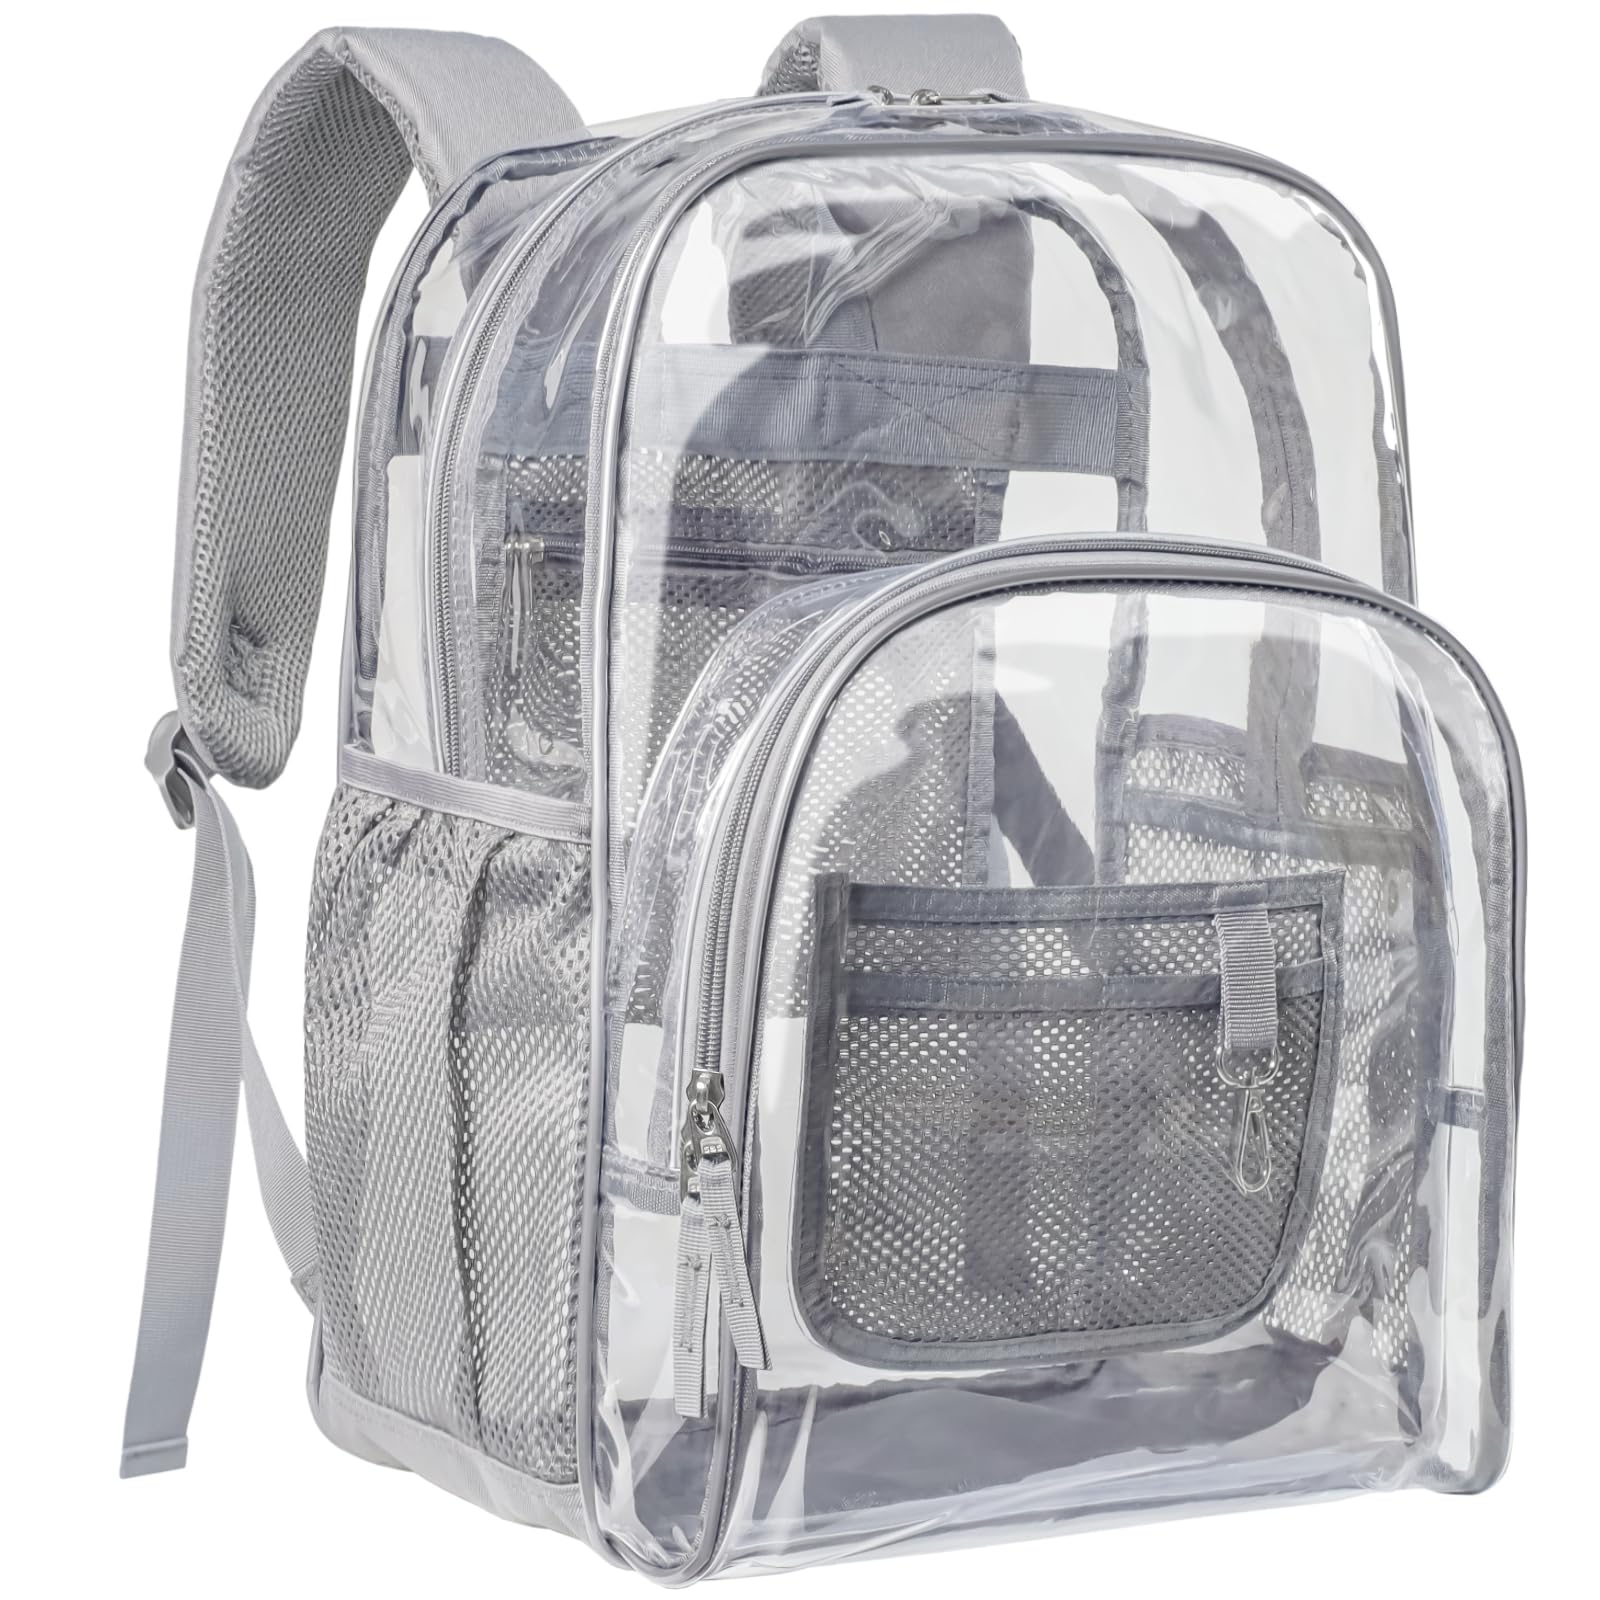 Clear backpack for boys